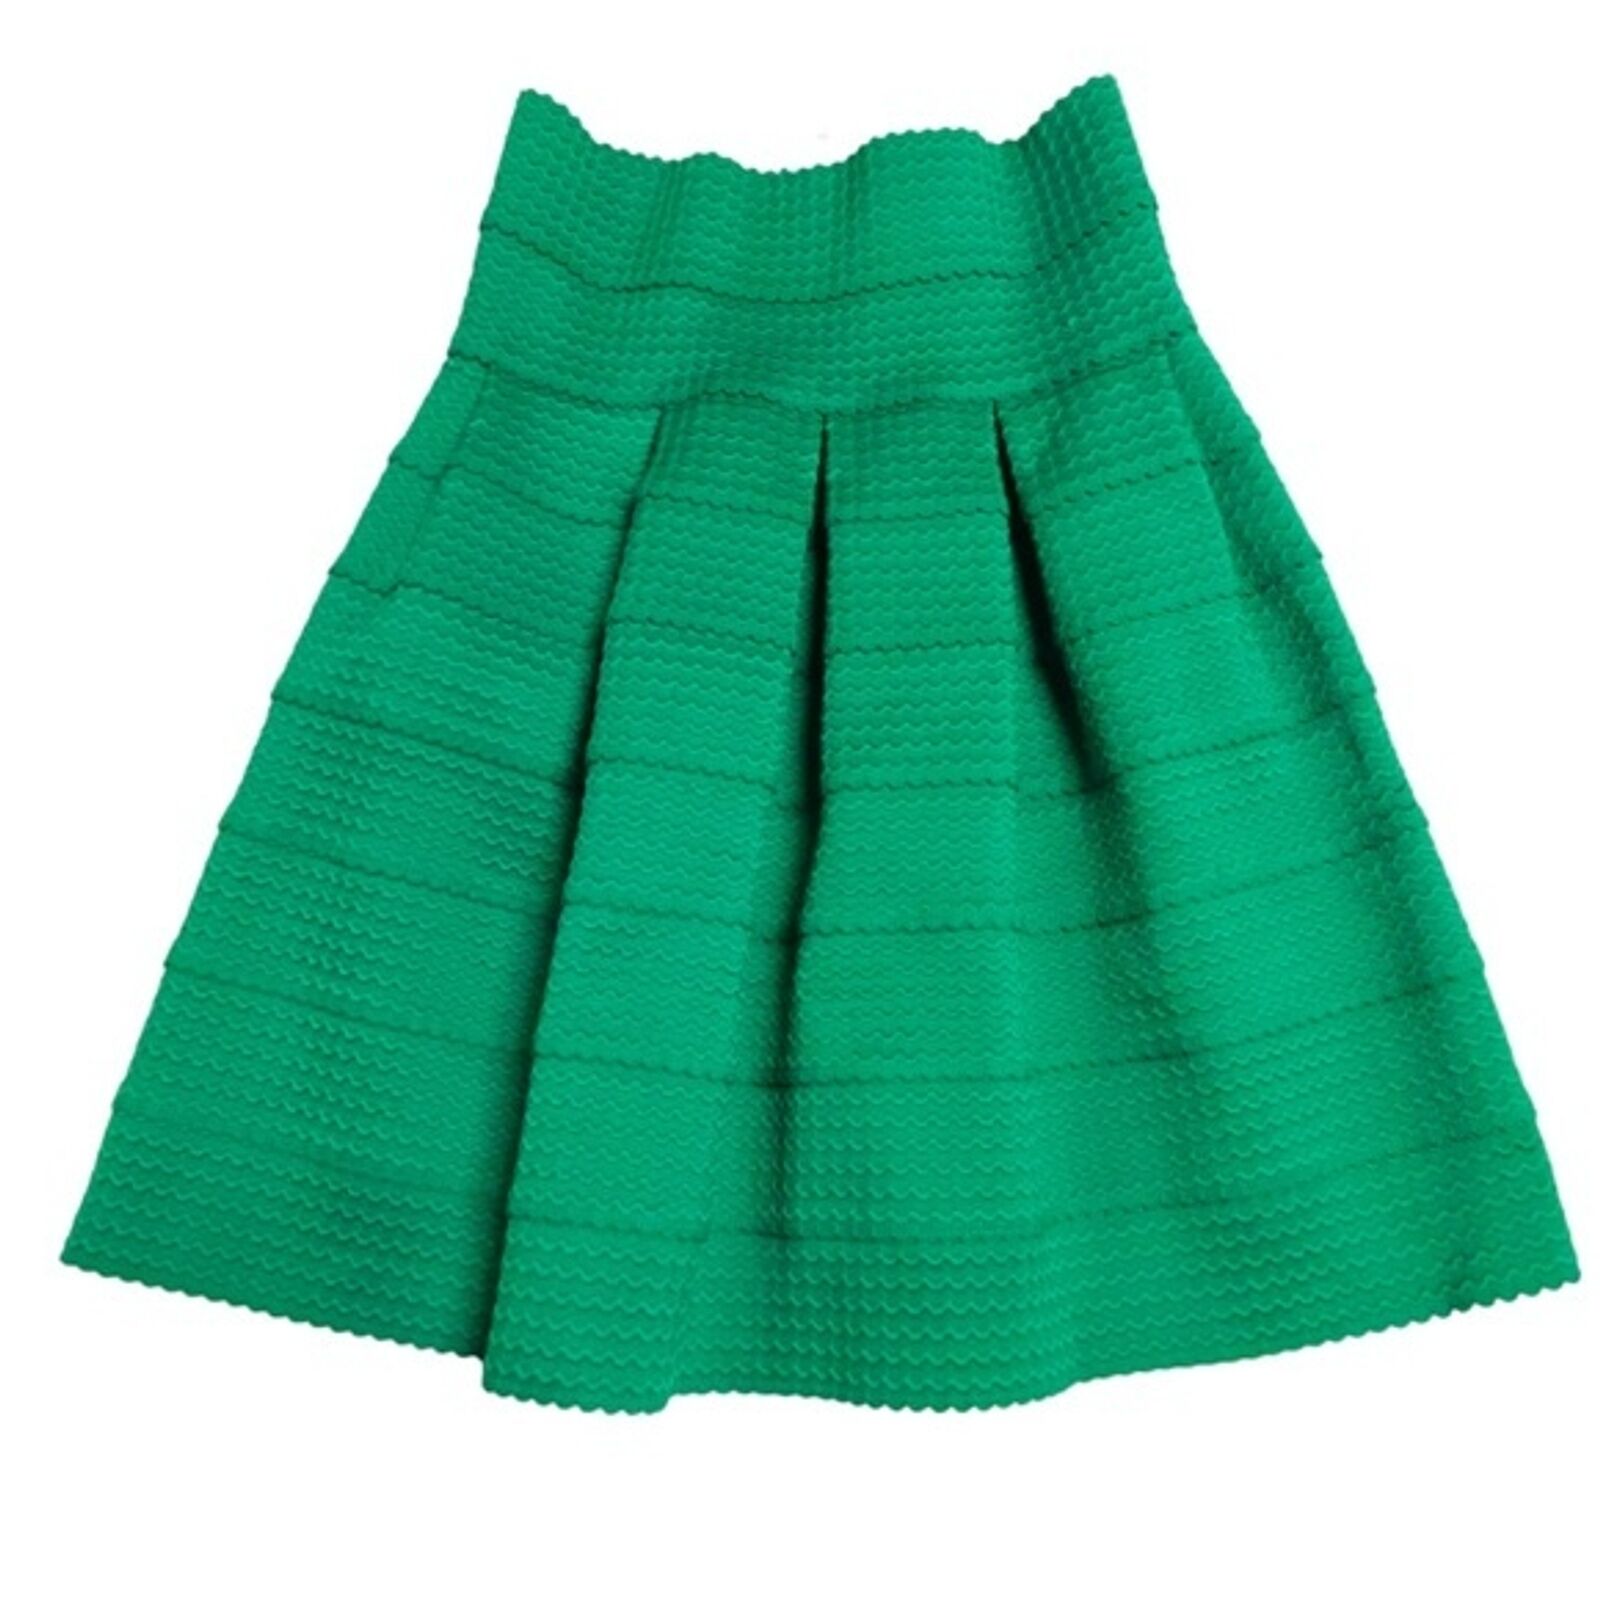 Anthropologie Bandage Girls From Savoy Ponte Bell Skirt Sz Xs / Small Green